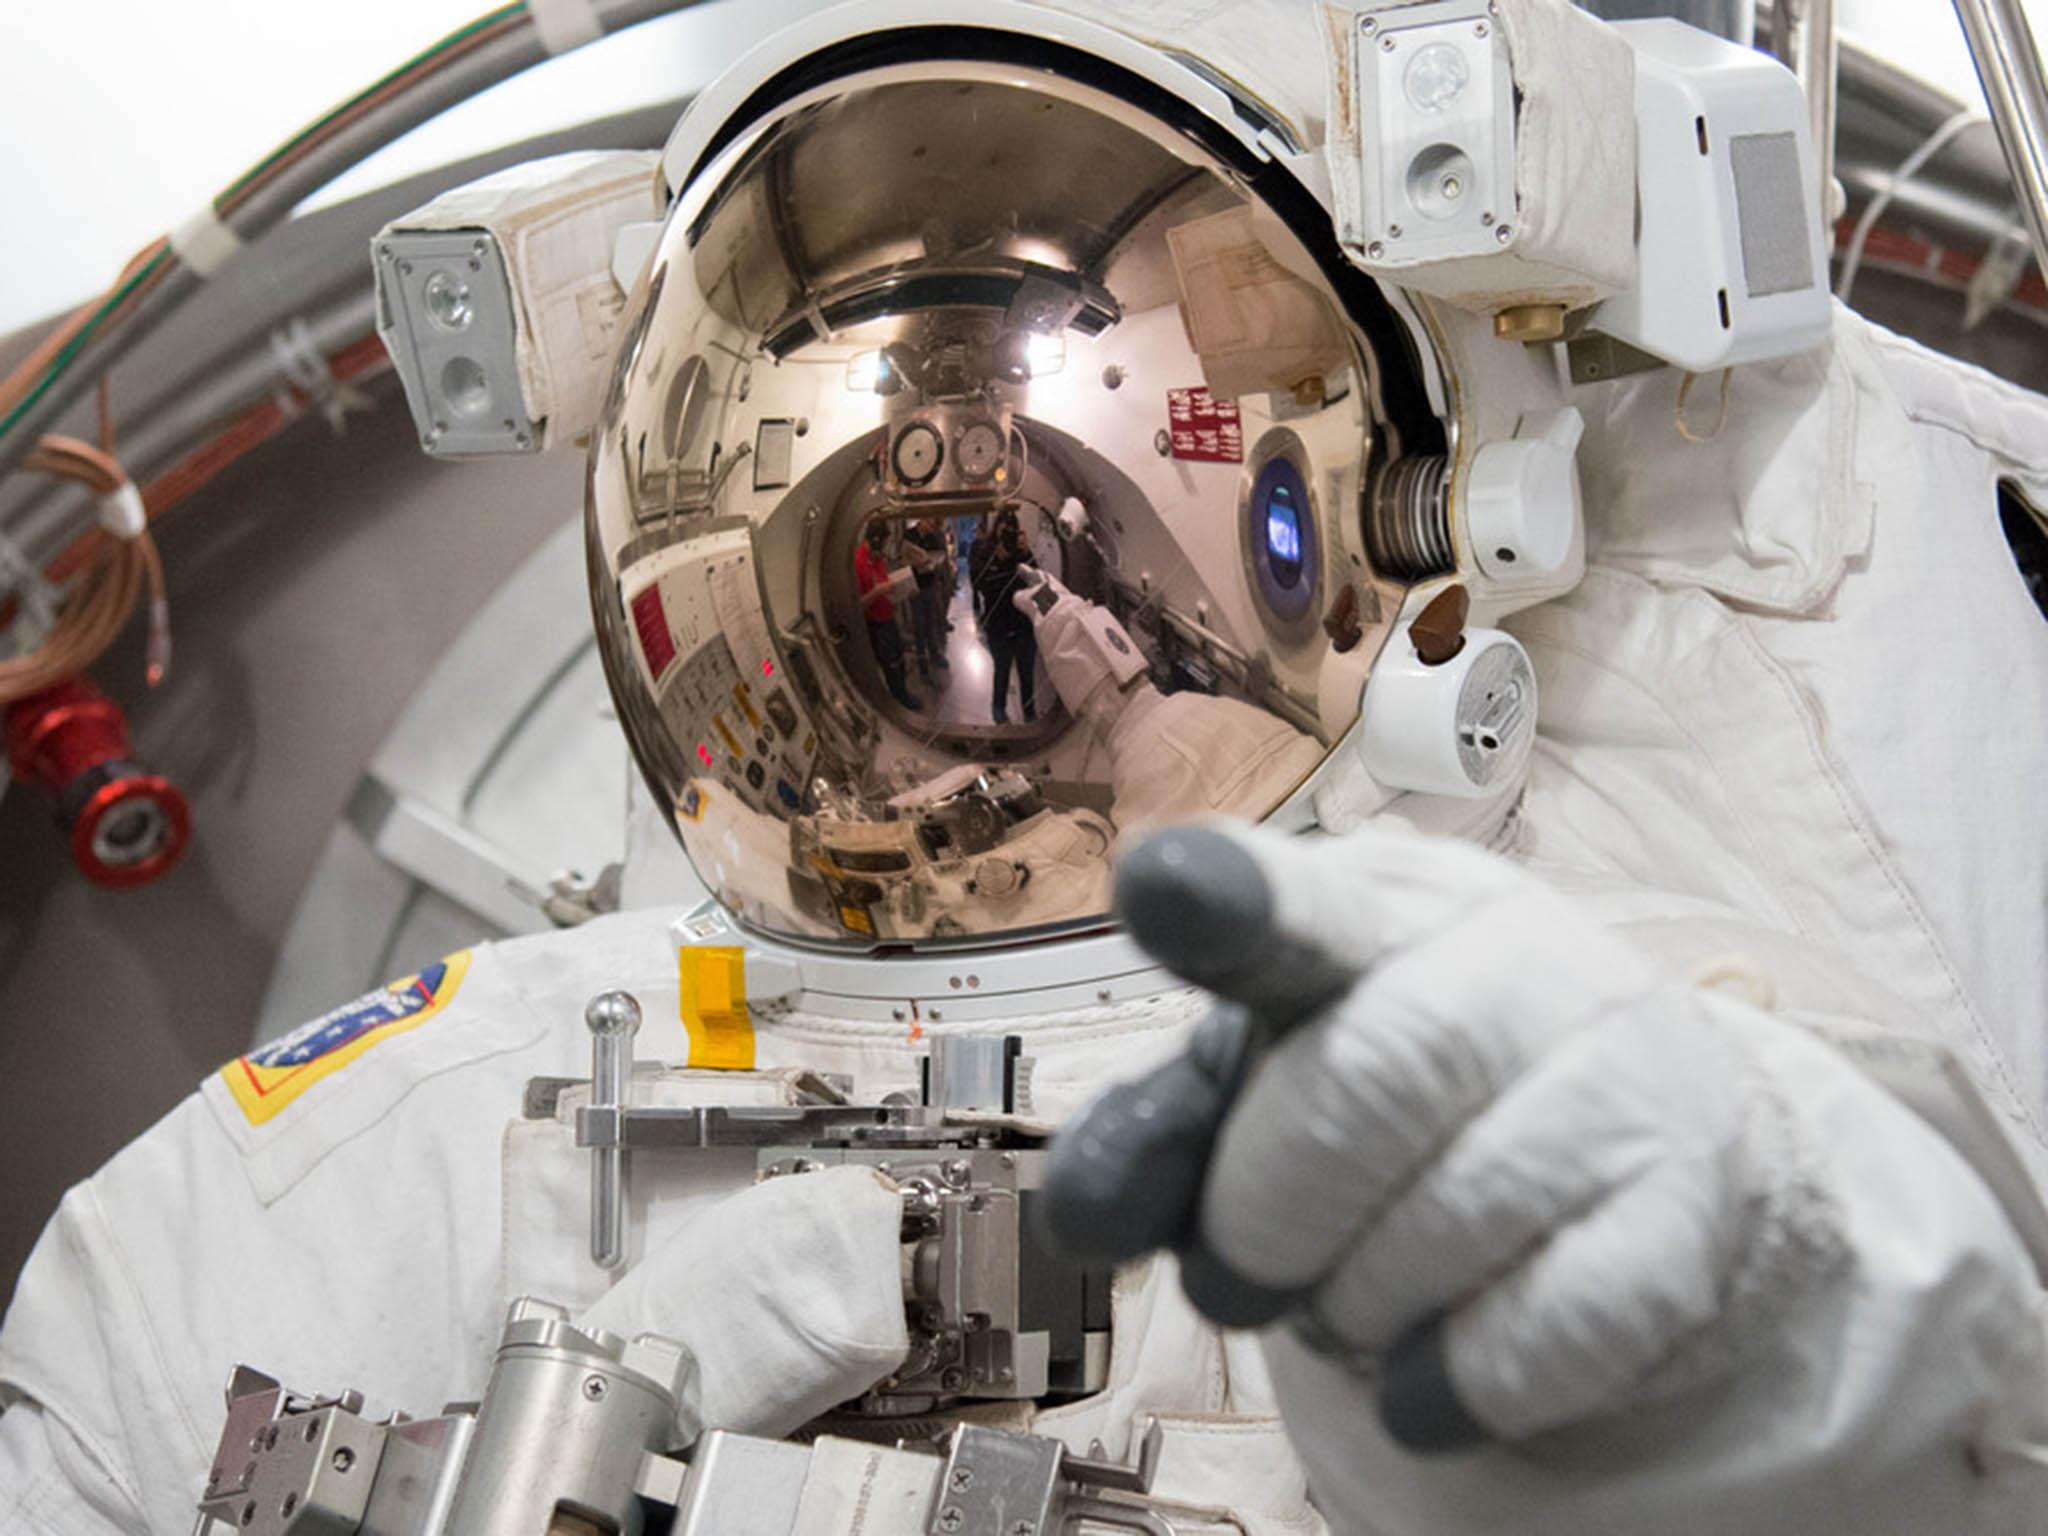 Nasa has been testing how aggression and violence in space can be managed